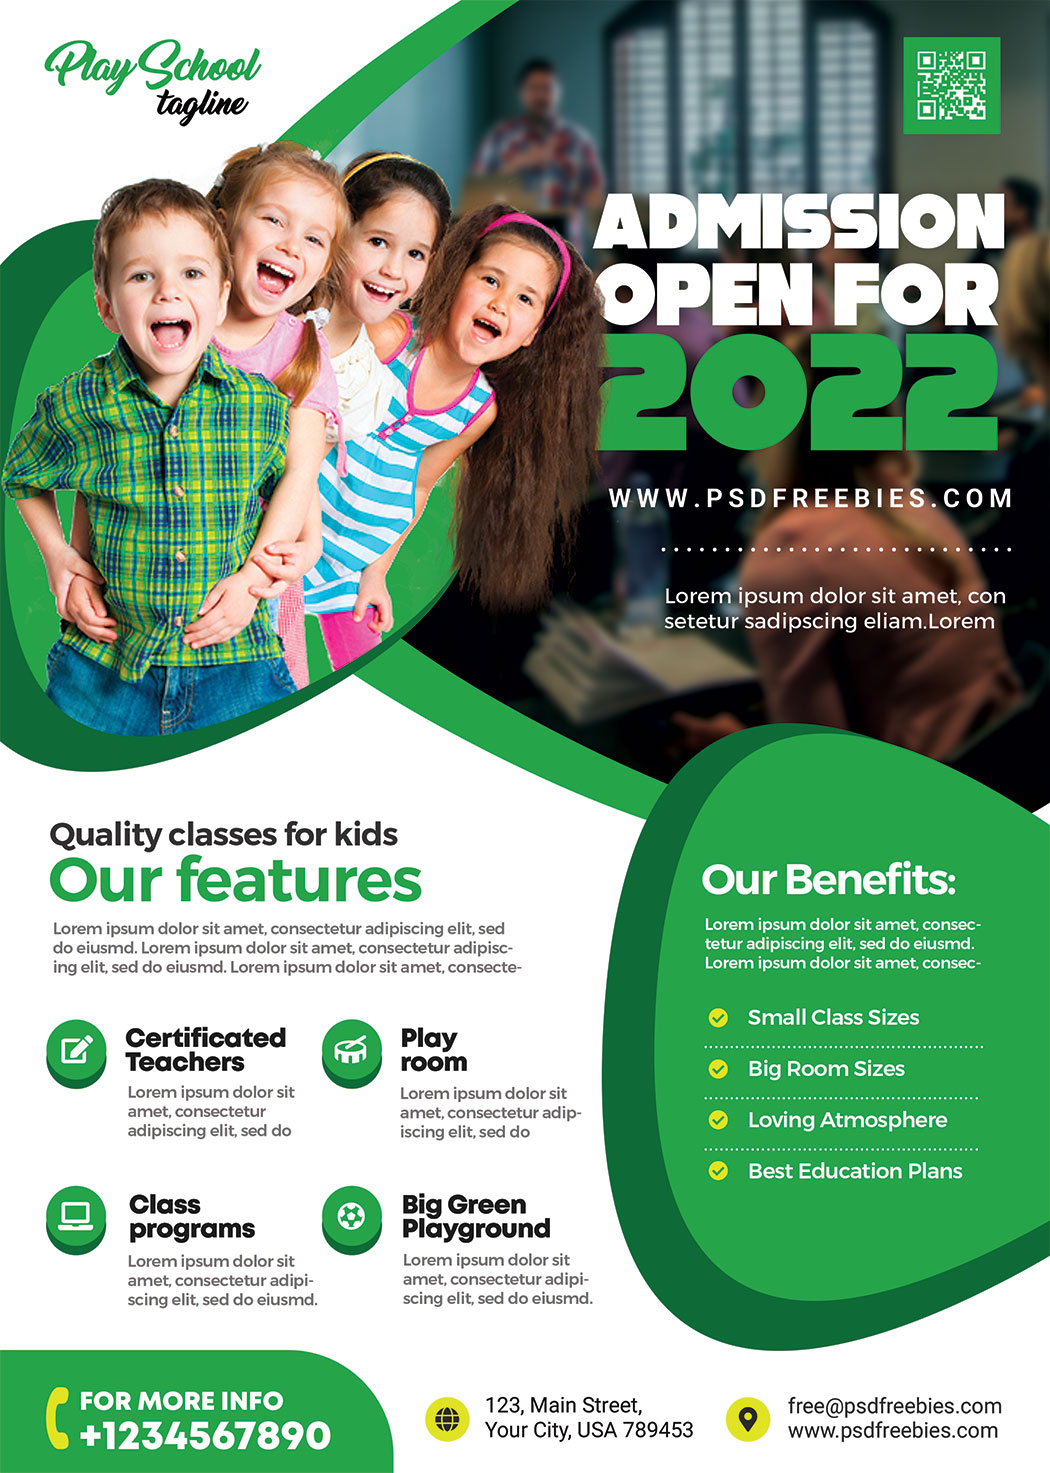 Kids School Admission Flyer PSD Template Preview PSDFreebies com